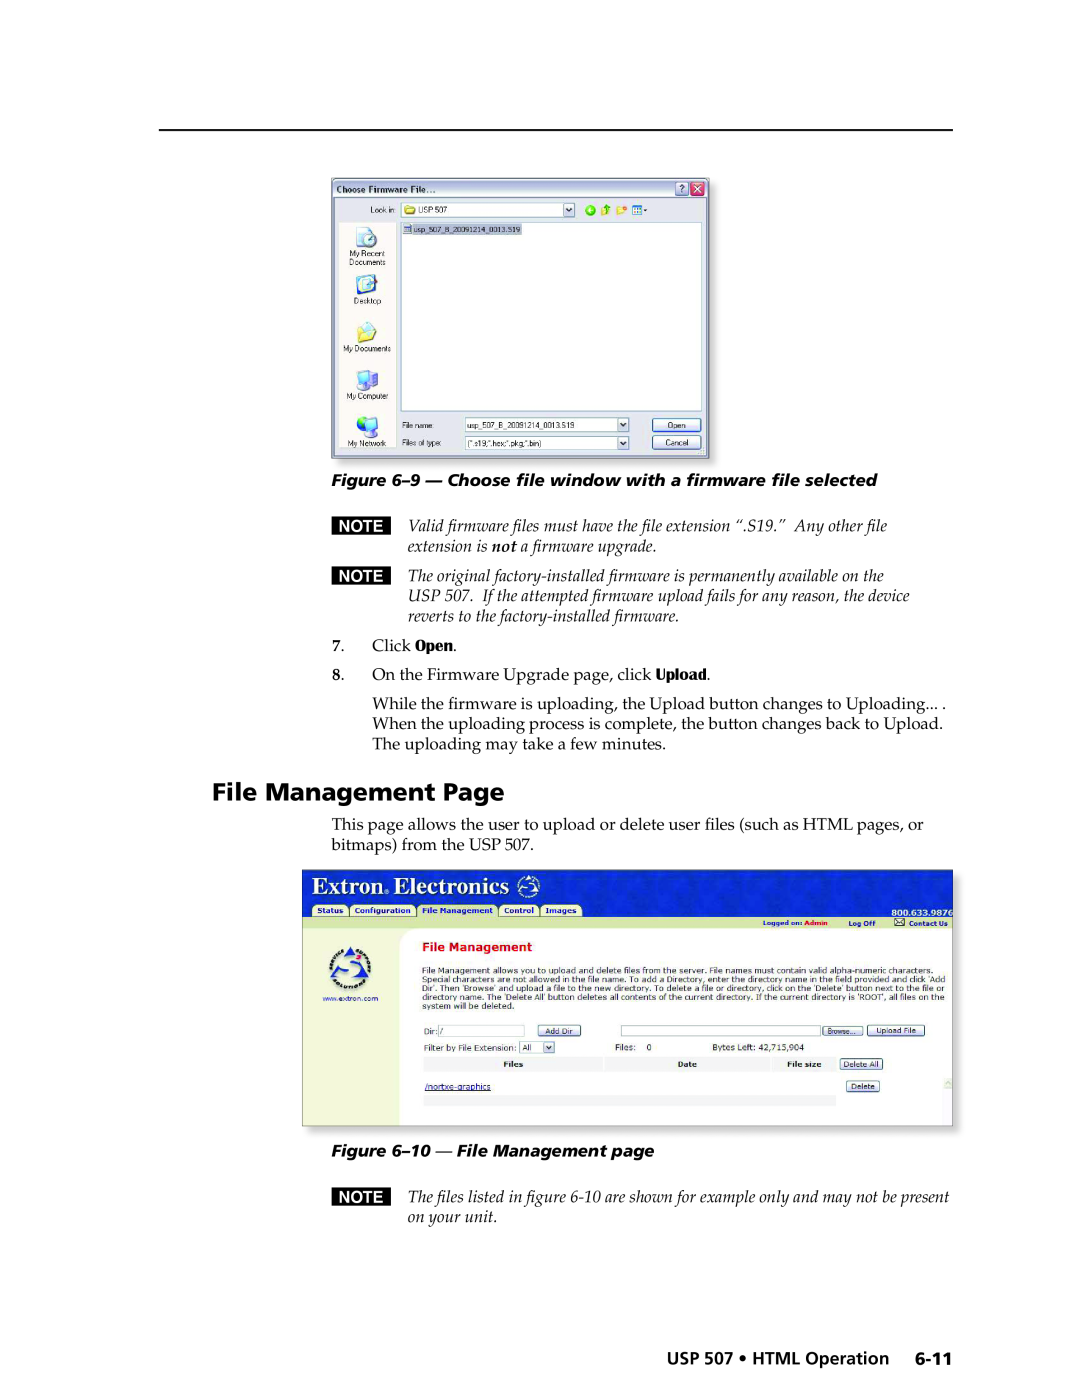 Extron electronic manual File Management Page, 10 — File Management page, USP 507 HTML Operation 